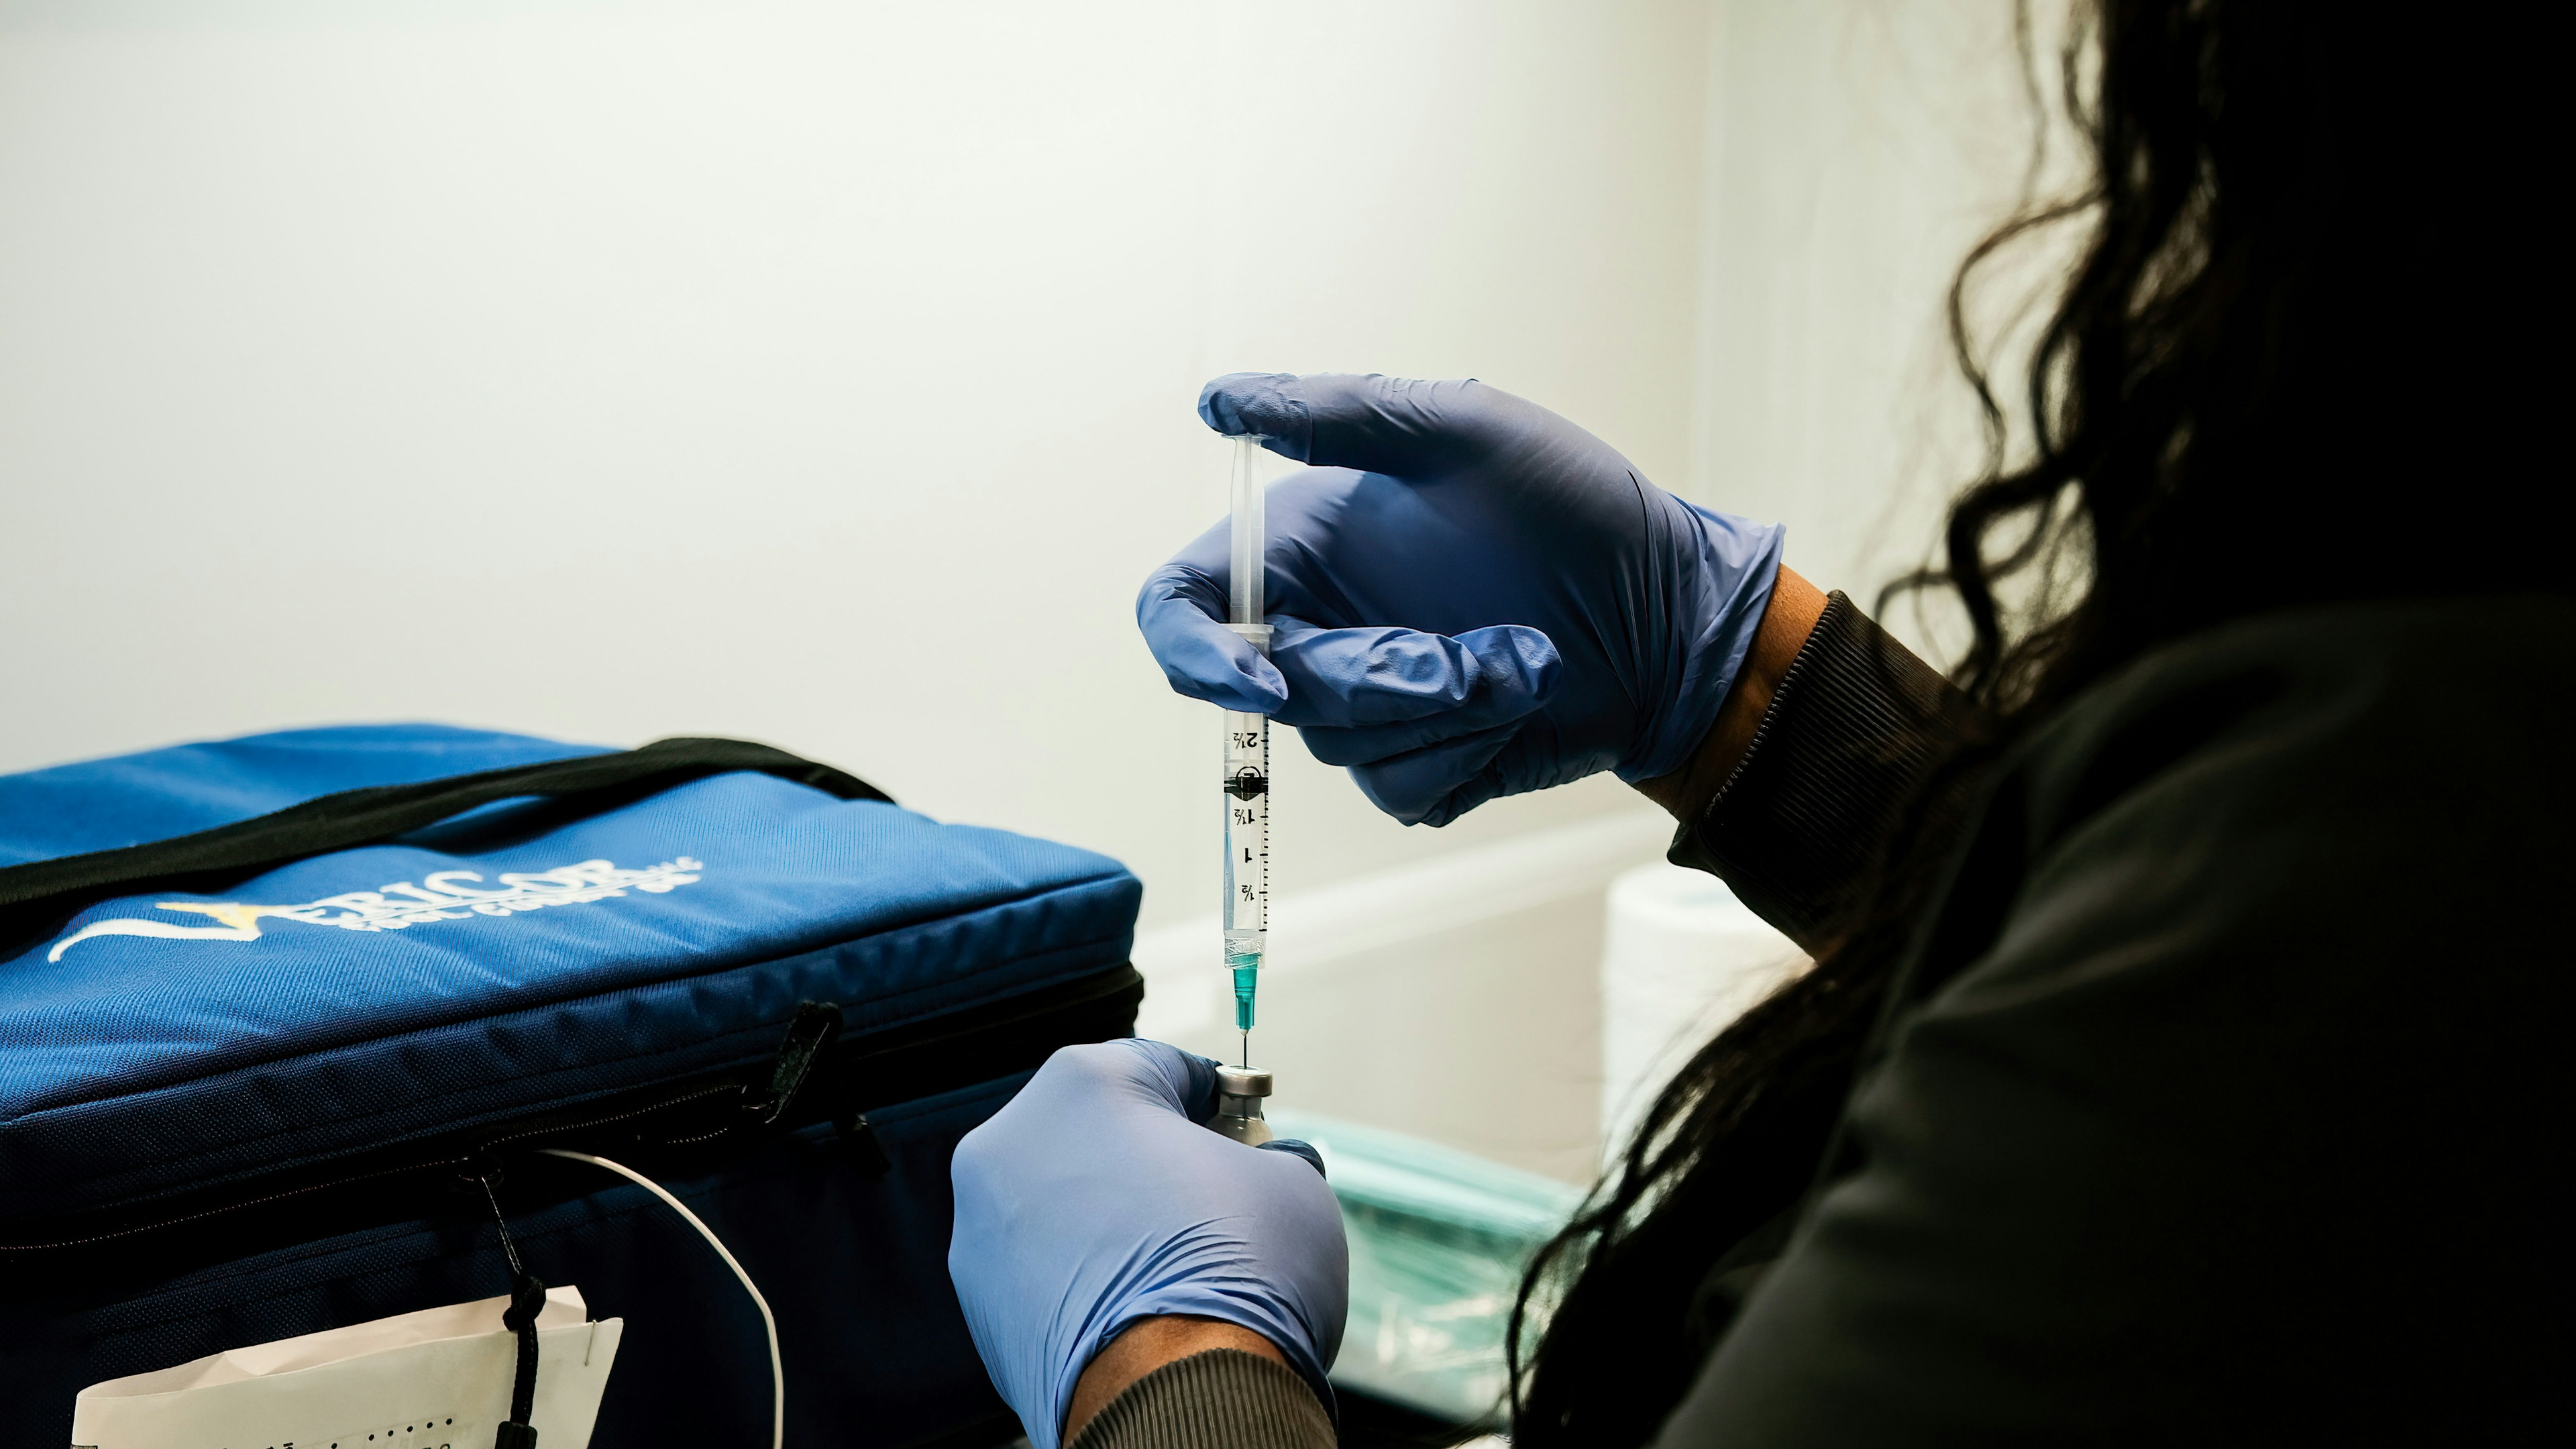 Health Care Workers from the Detroit Health Department prepare a dose of the Pfizer Covid-19 vaccine